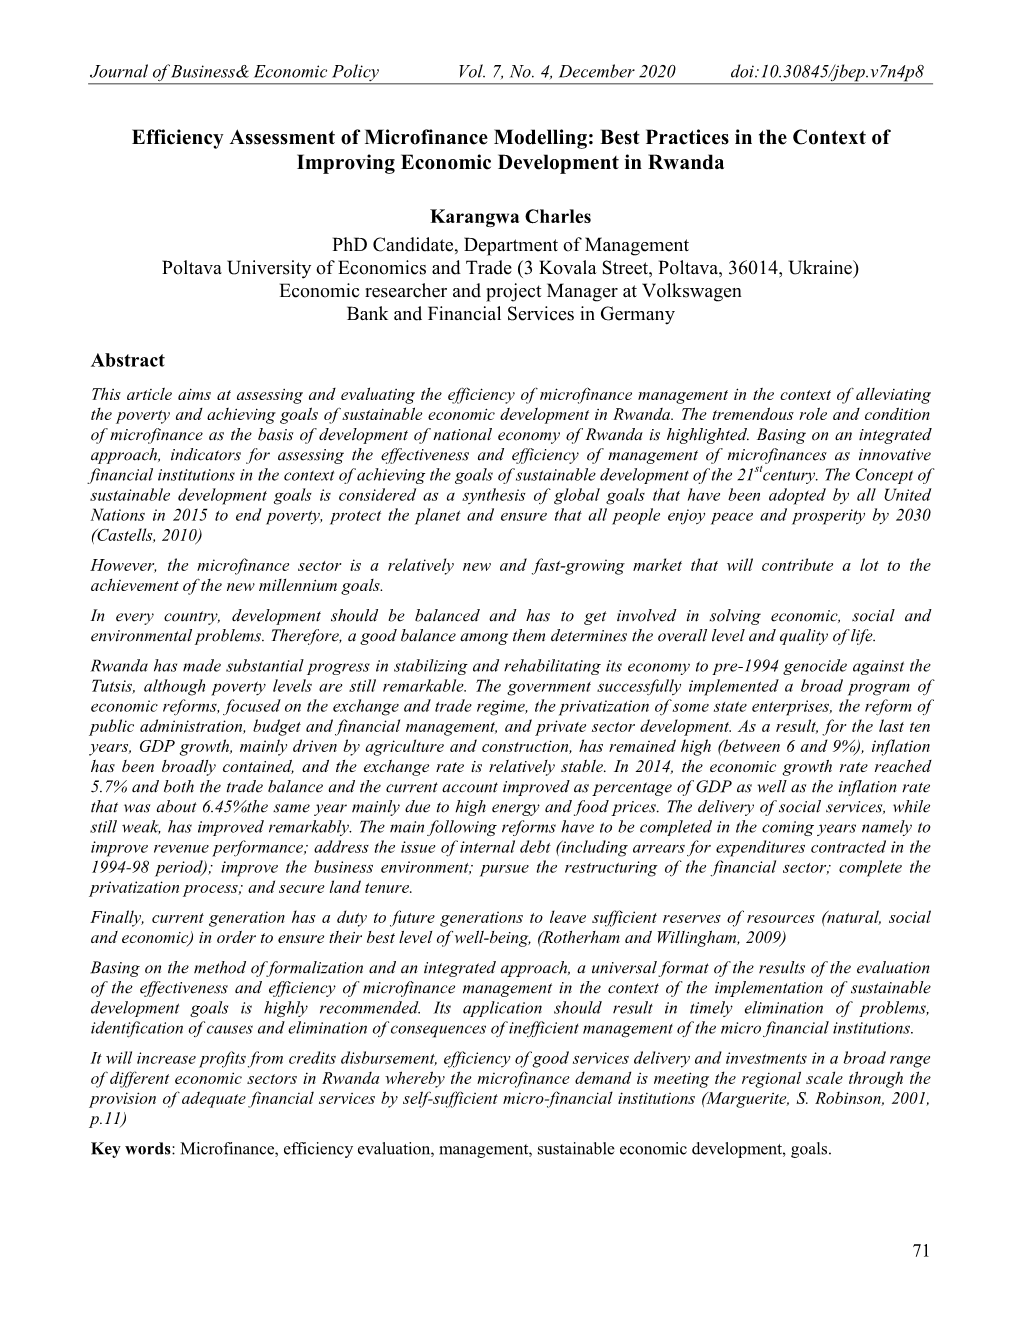 Efficiency Assessment of Microfinance Modelling: Best Practices in the Context of Improving Economic Development in Rwanda